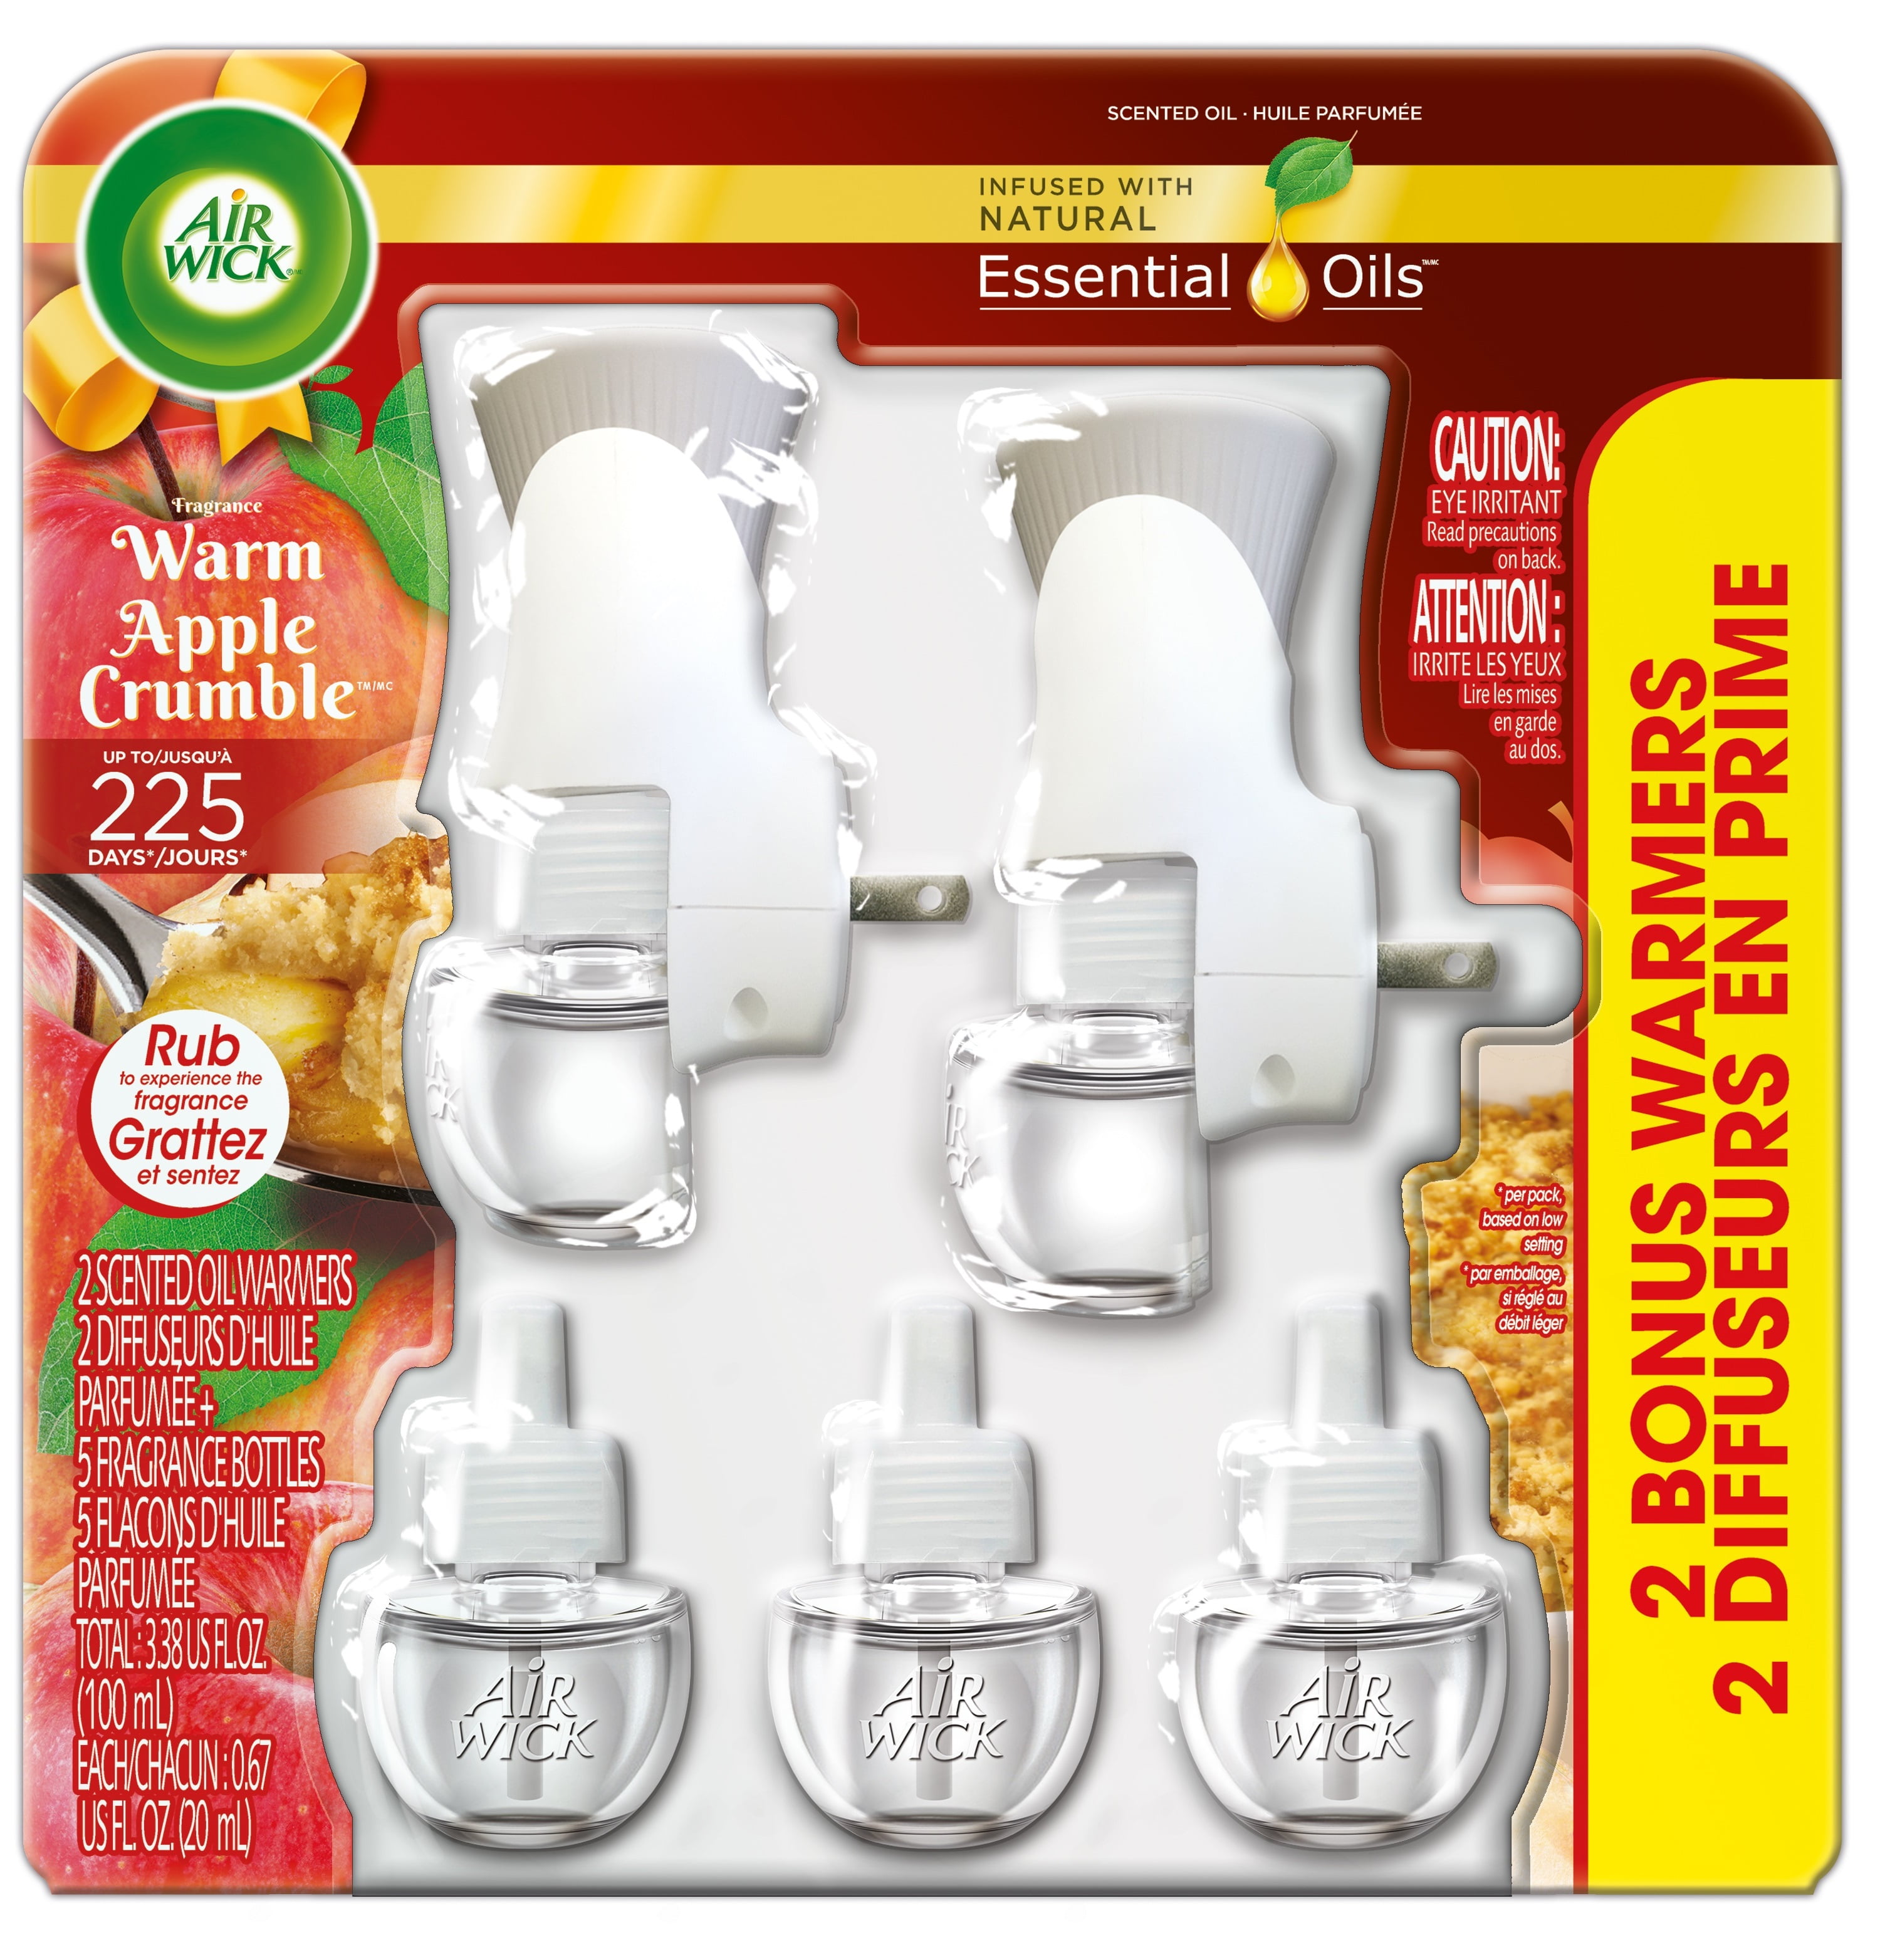 Air Wick Holiday Scented Oil Kit (2 Warmers + 5 Refills), Warm Apple